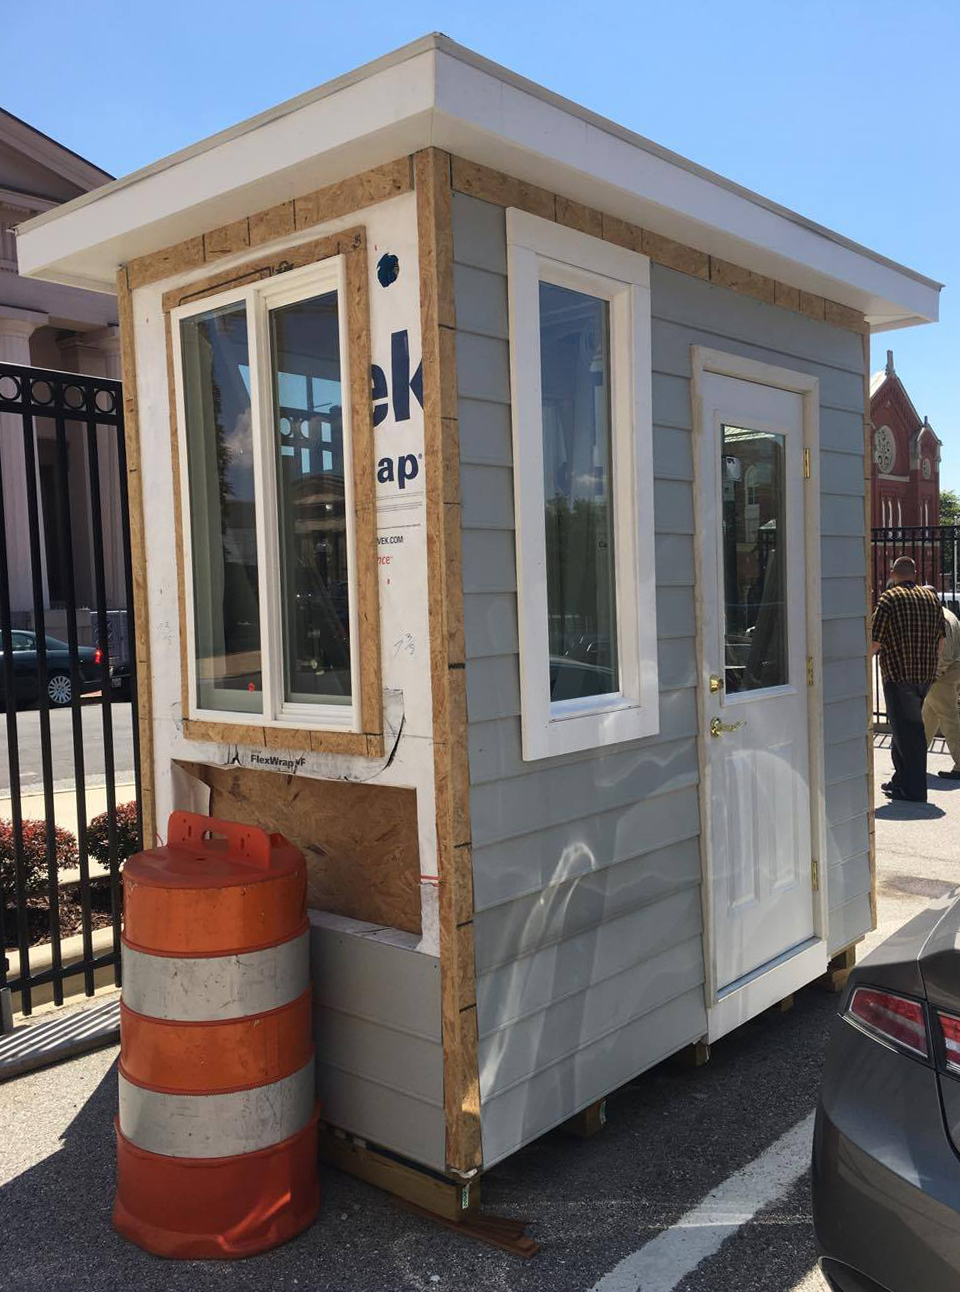 Delbert Adams Construction Group Builds New Security Guard Booth for Helping Up Mission